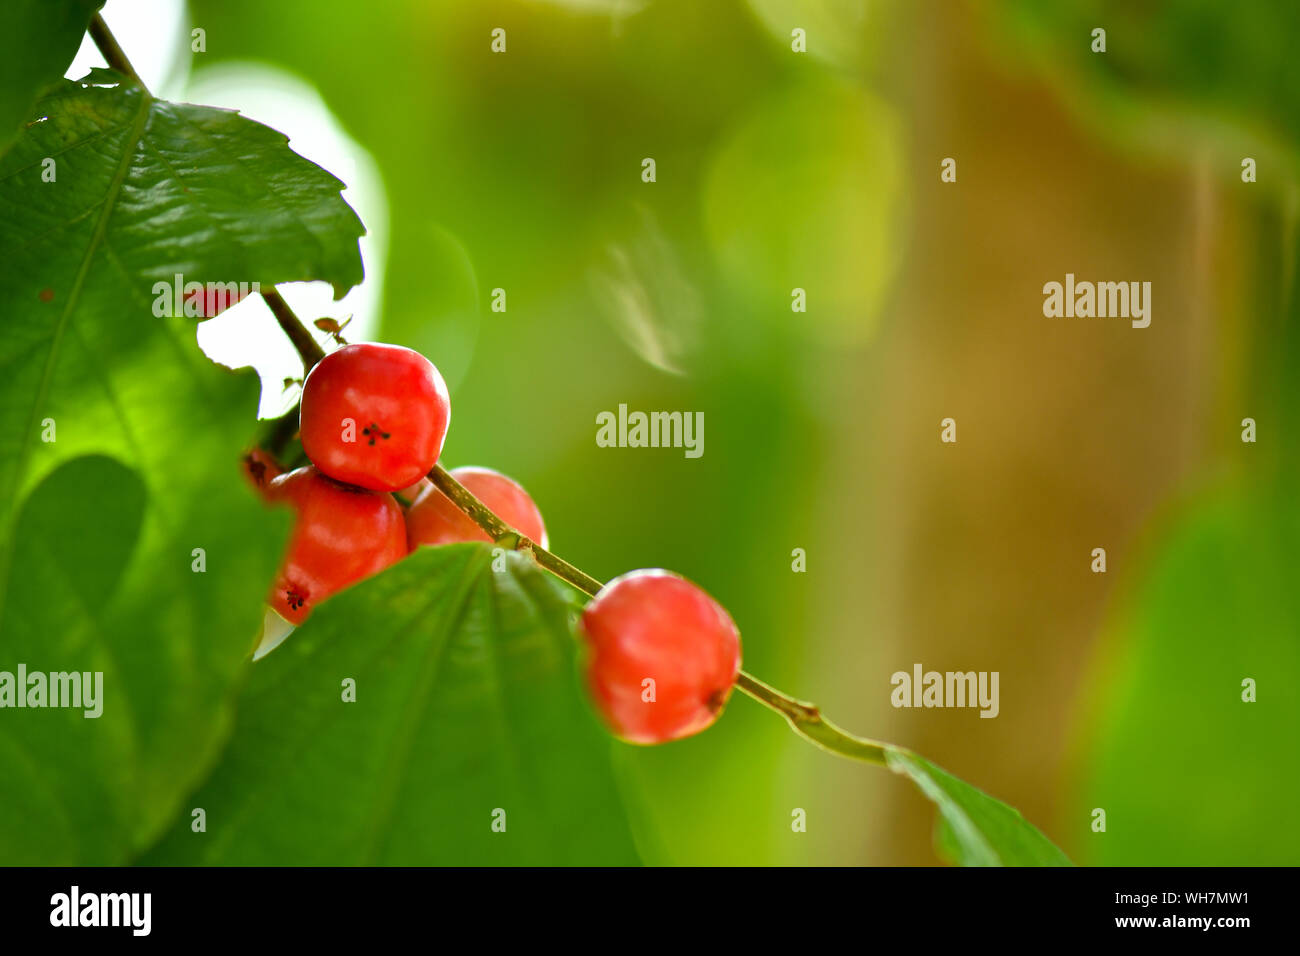 Rukam Masam is a kind of red cherry type fruit that grow on trees Stock Photo